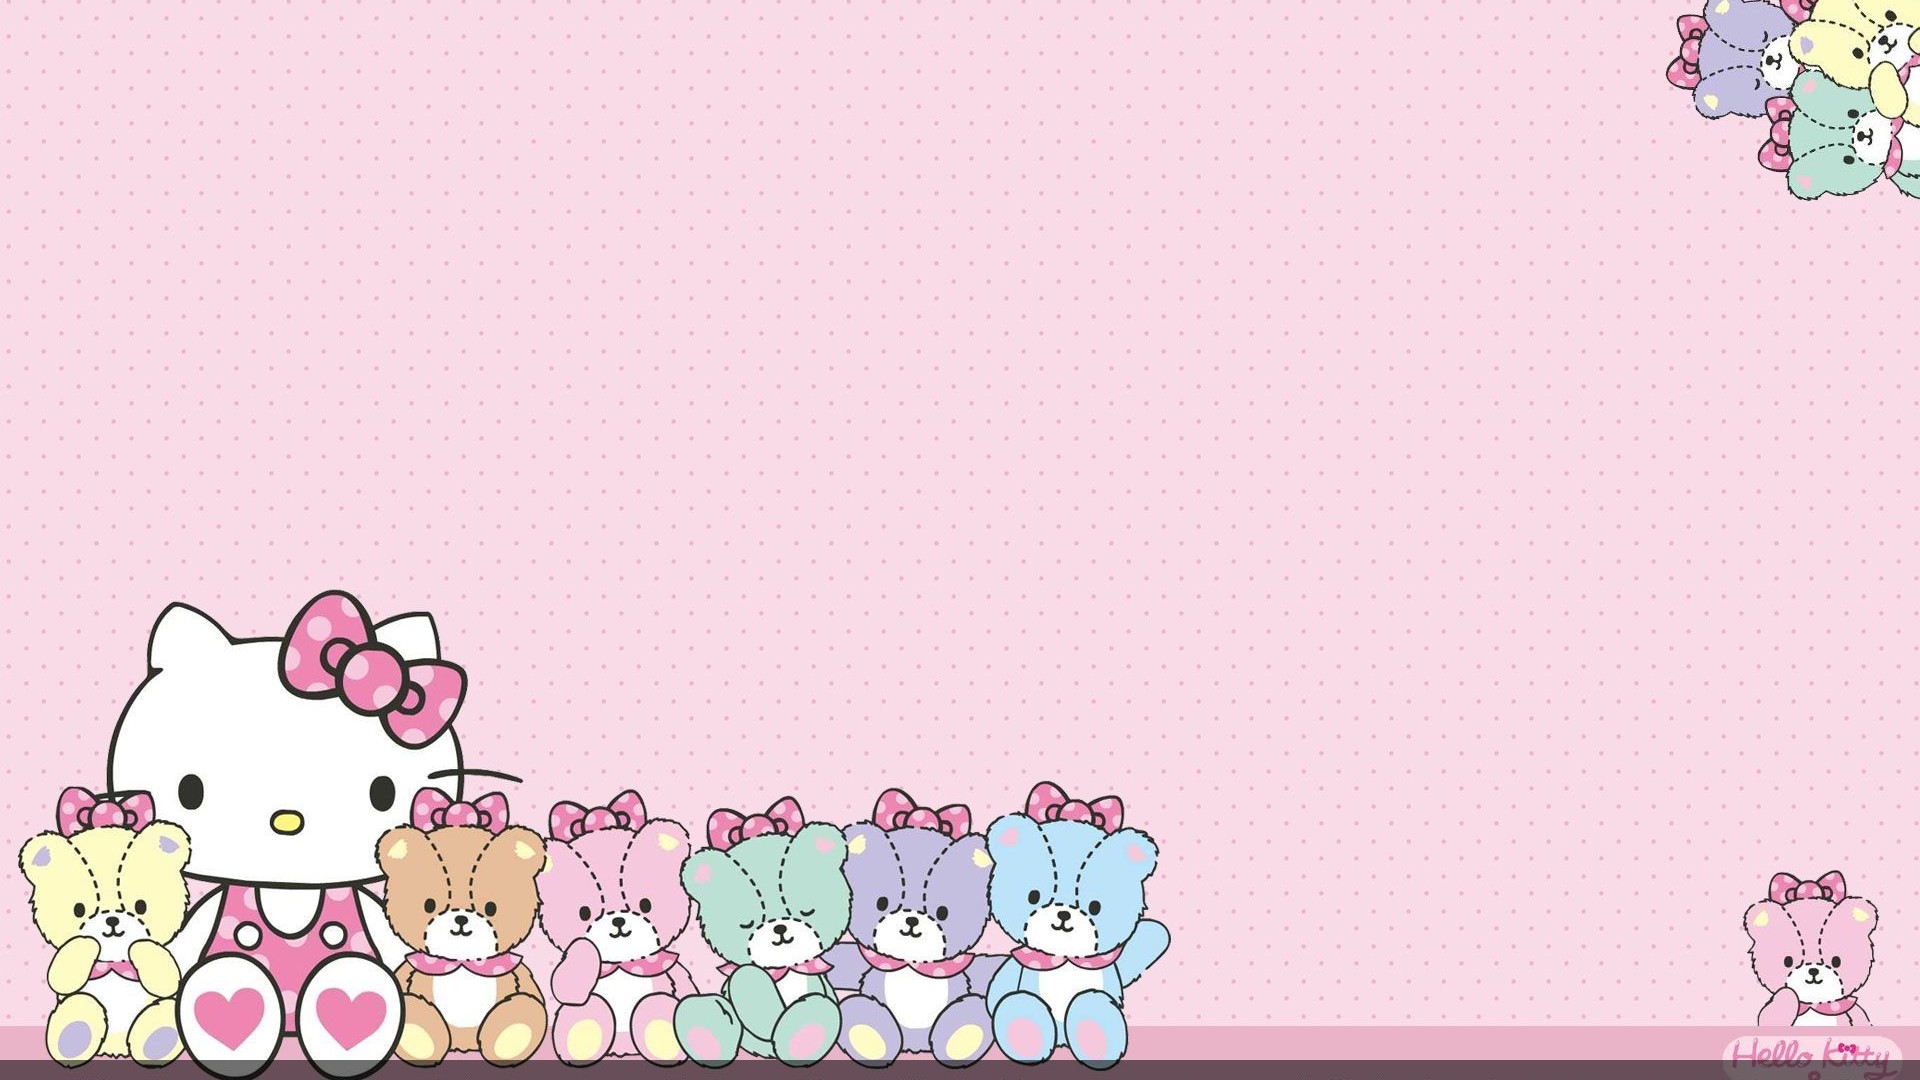 Hello Kitty Desktop Wallpaper with image resolution 1920x1080 pixel. You can use this wallpaper as background for your desktop Computer Screensavers, Android or iPhone smartphones